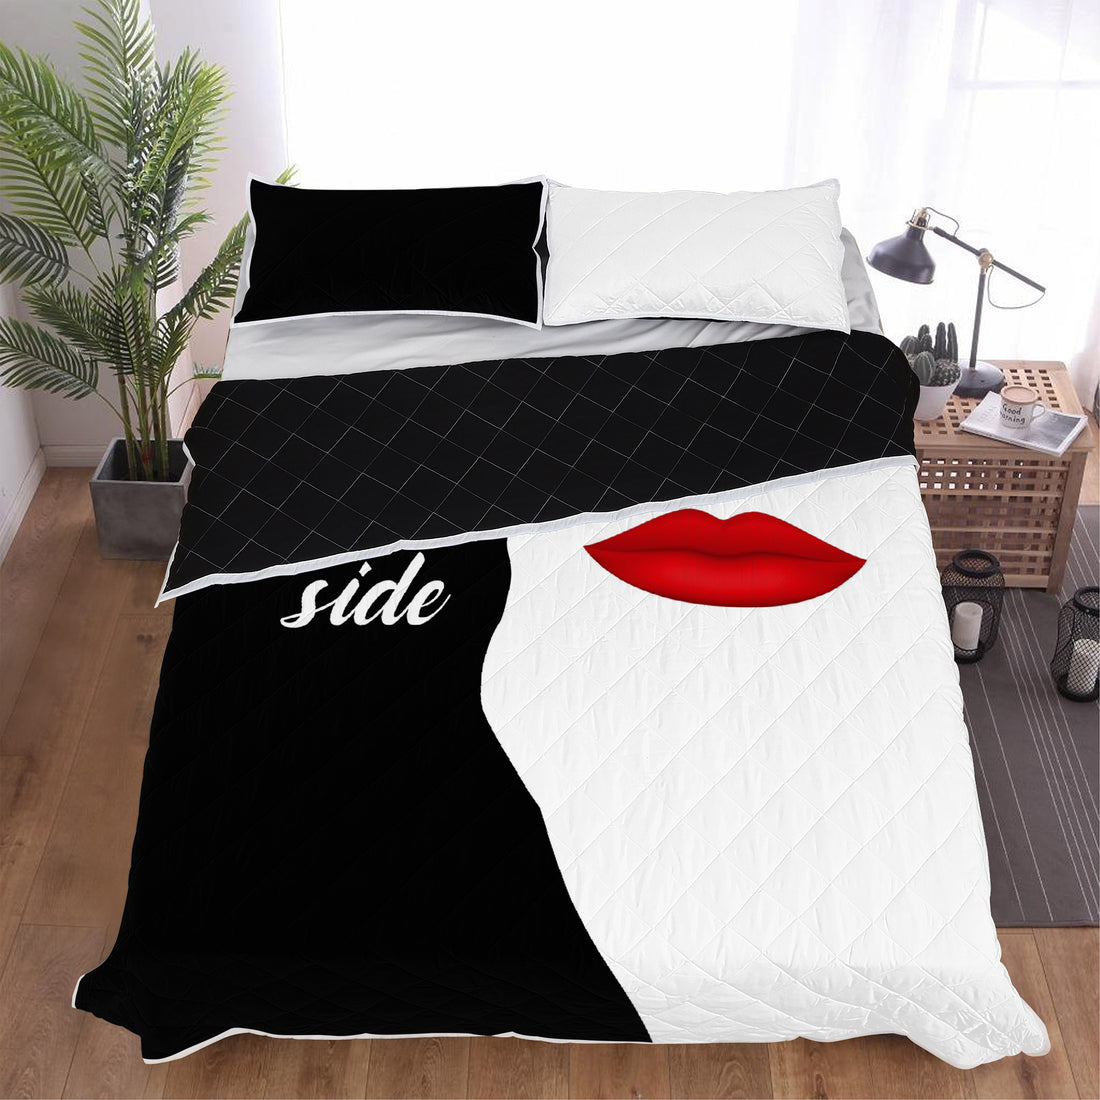 D51 Quilt Bed Sets Her side, His side Home-clothes-jewelry